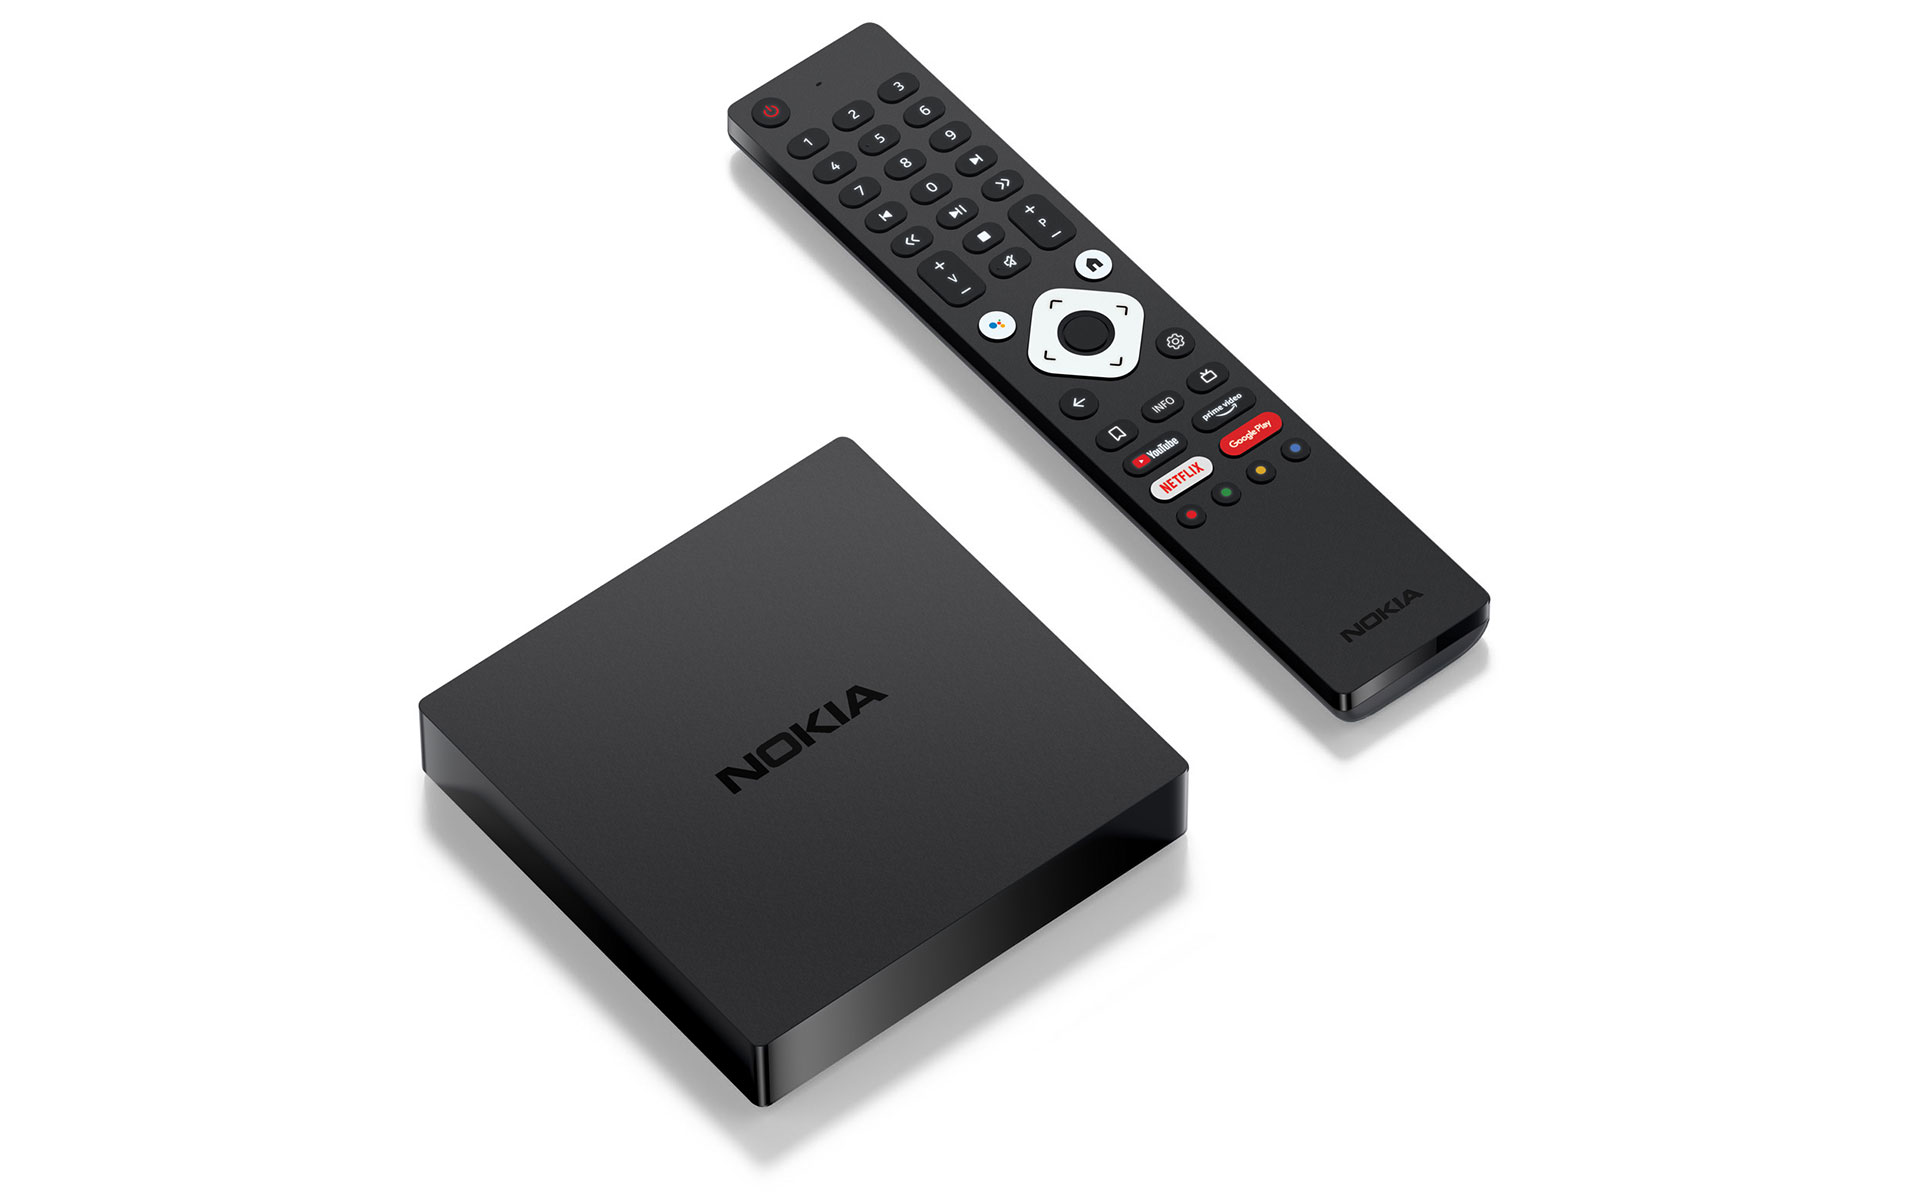 nokia streaming box 8000 with android